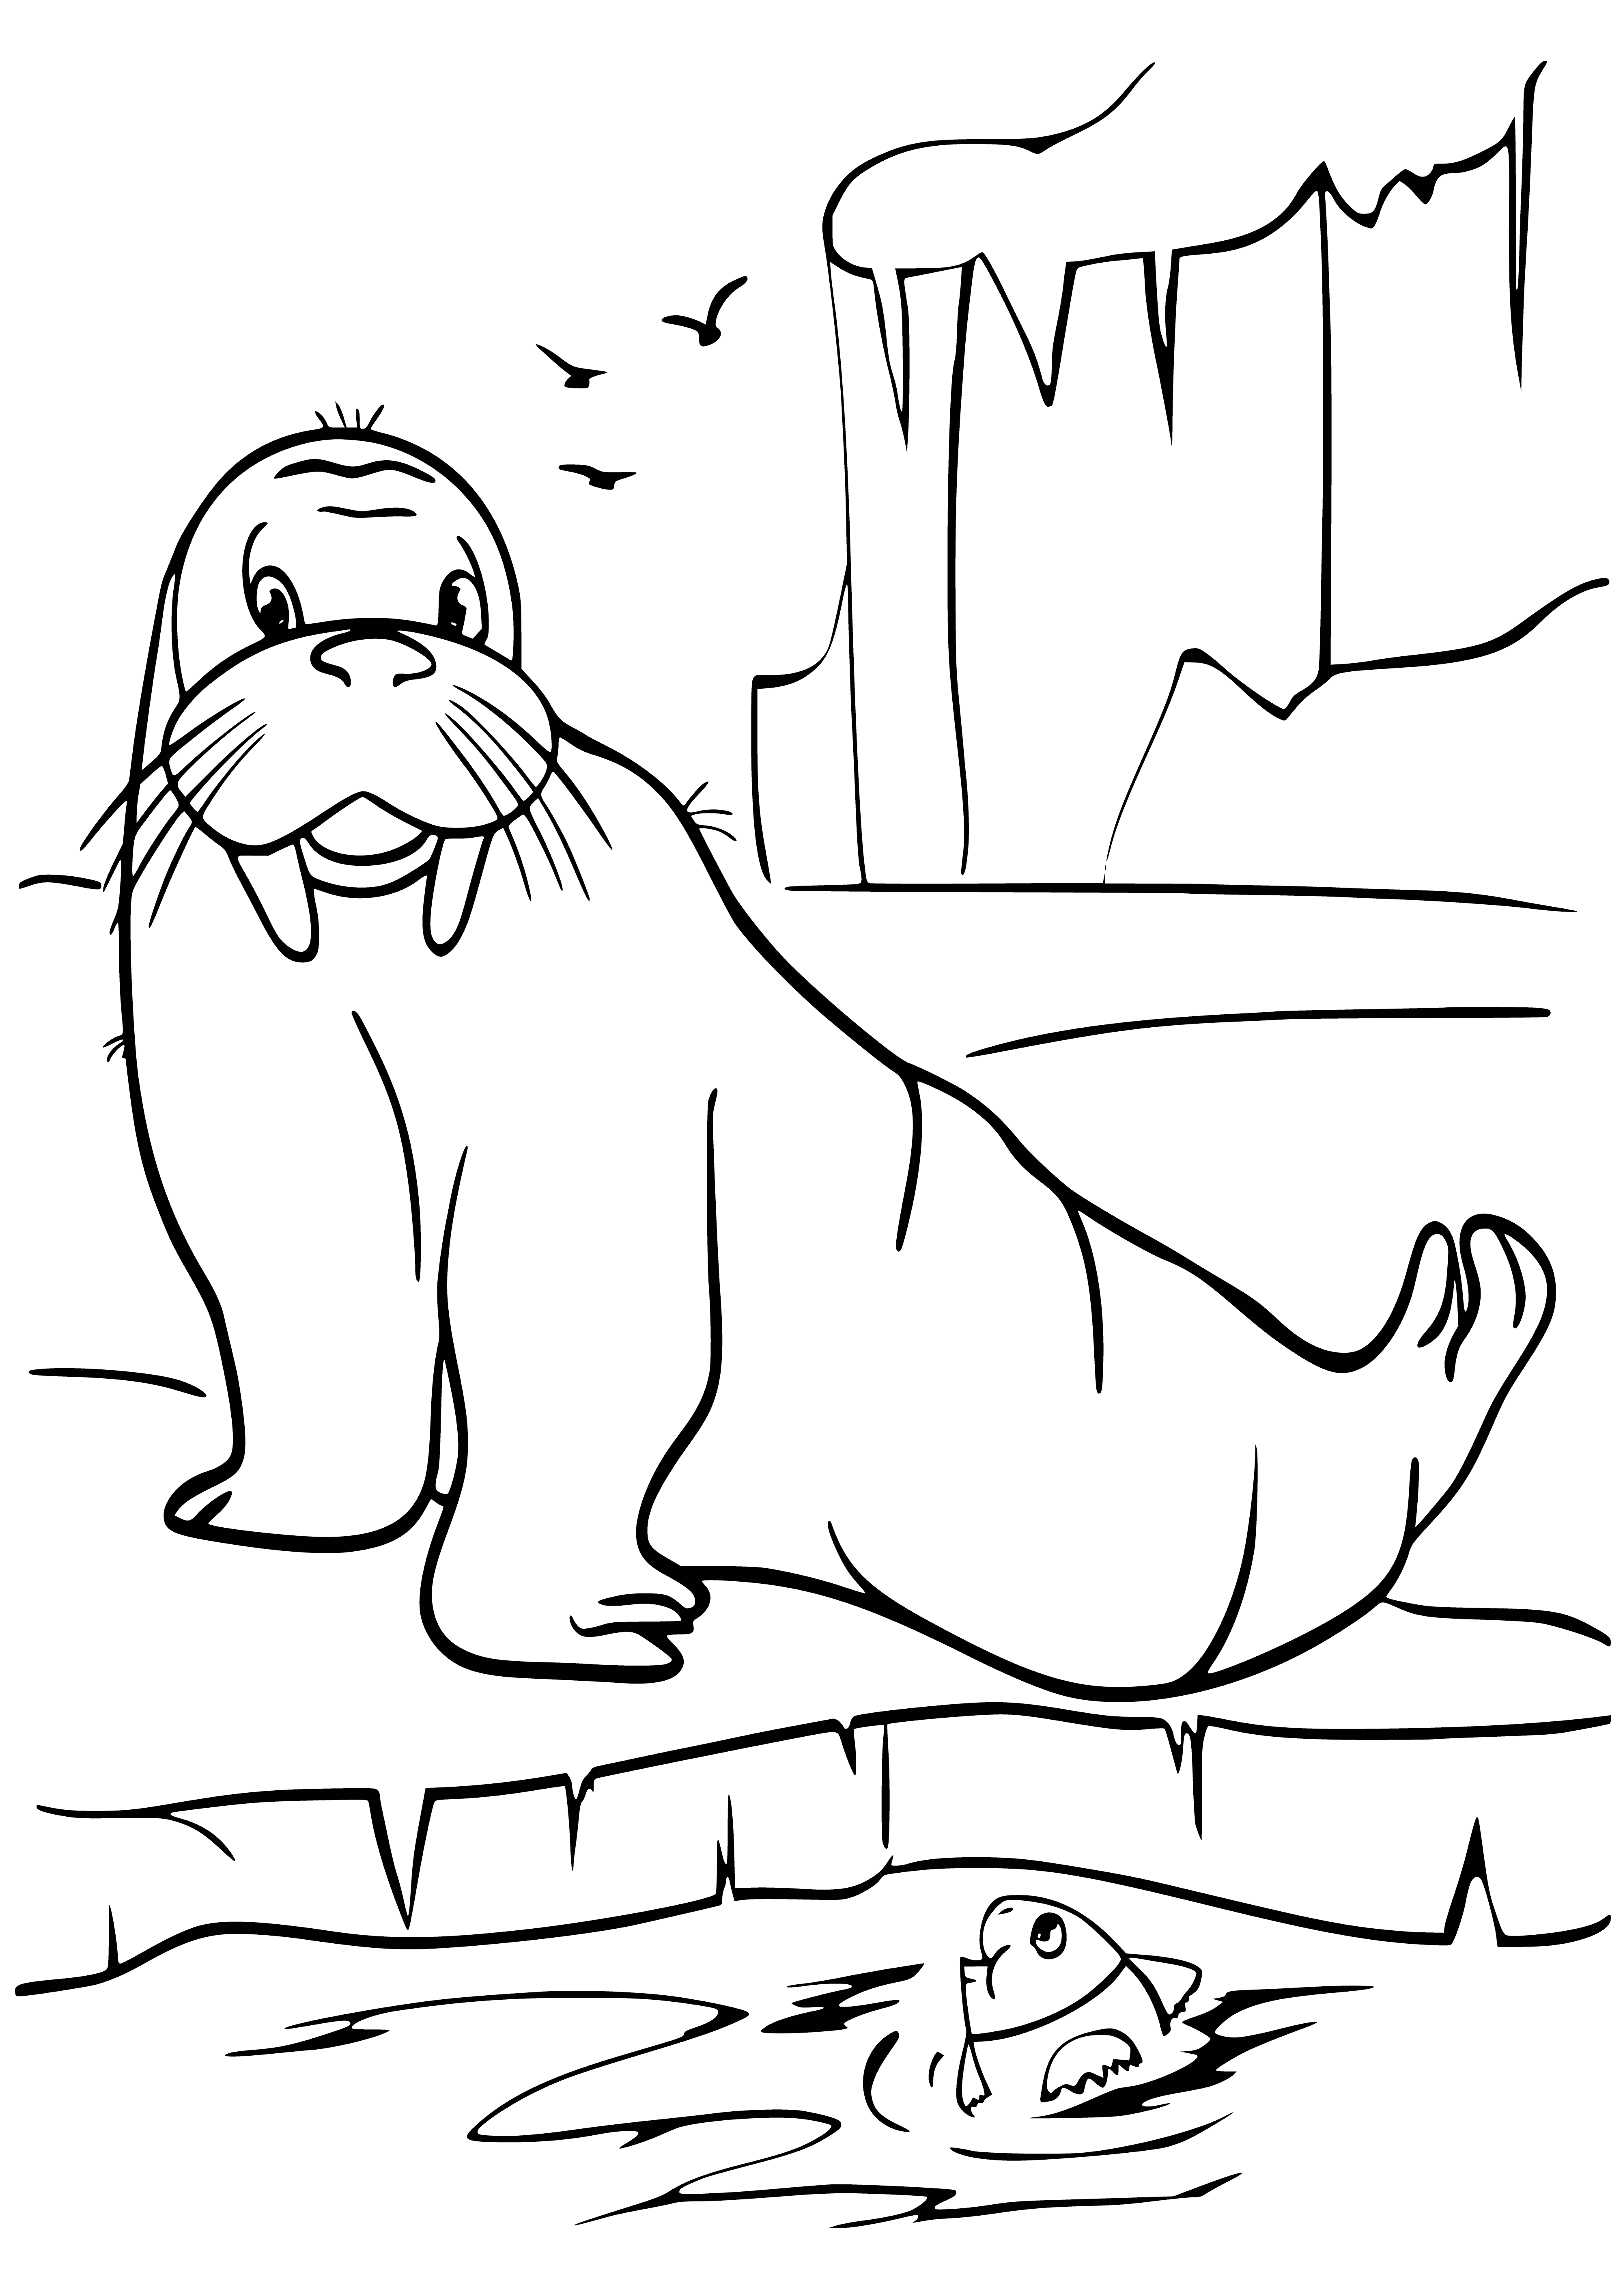 coloring page: Walrus: large mammal with wrinkled grayish-brown skin, tusks, & good swimmer/climber. Can stay underwater & often seen sunning.